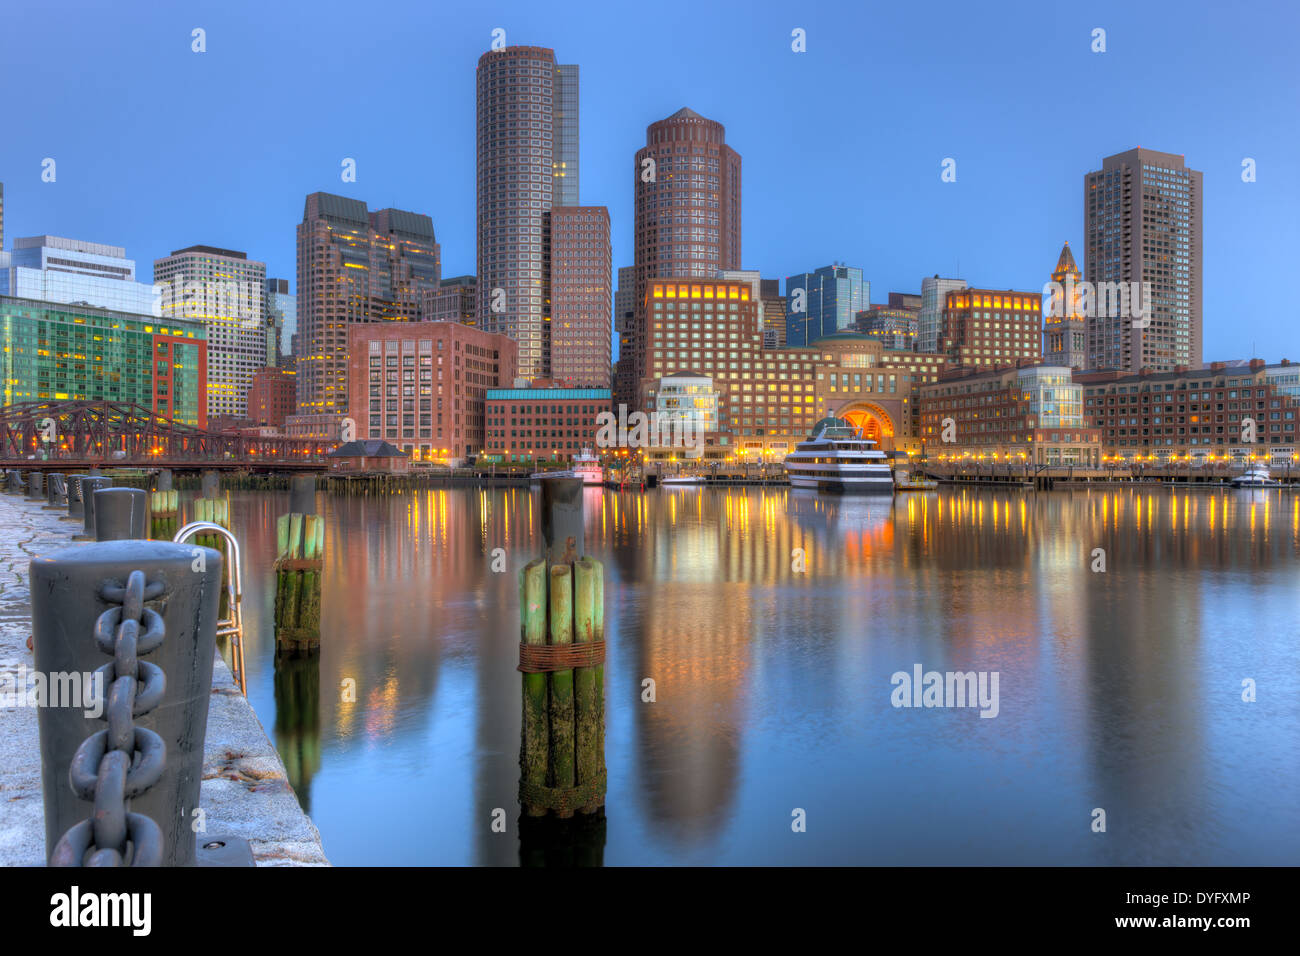 The skyline reflects off the still waters of the harbor before sunrise as a new day begins in Boston, Massachusetts. Stock Photo